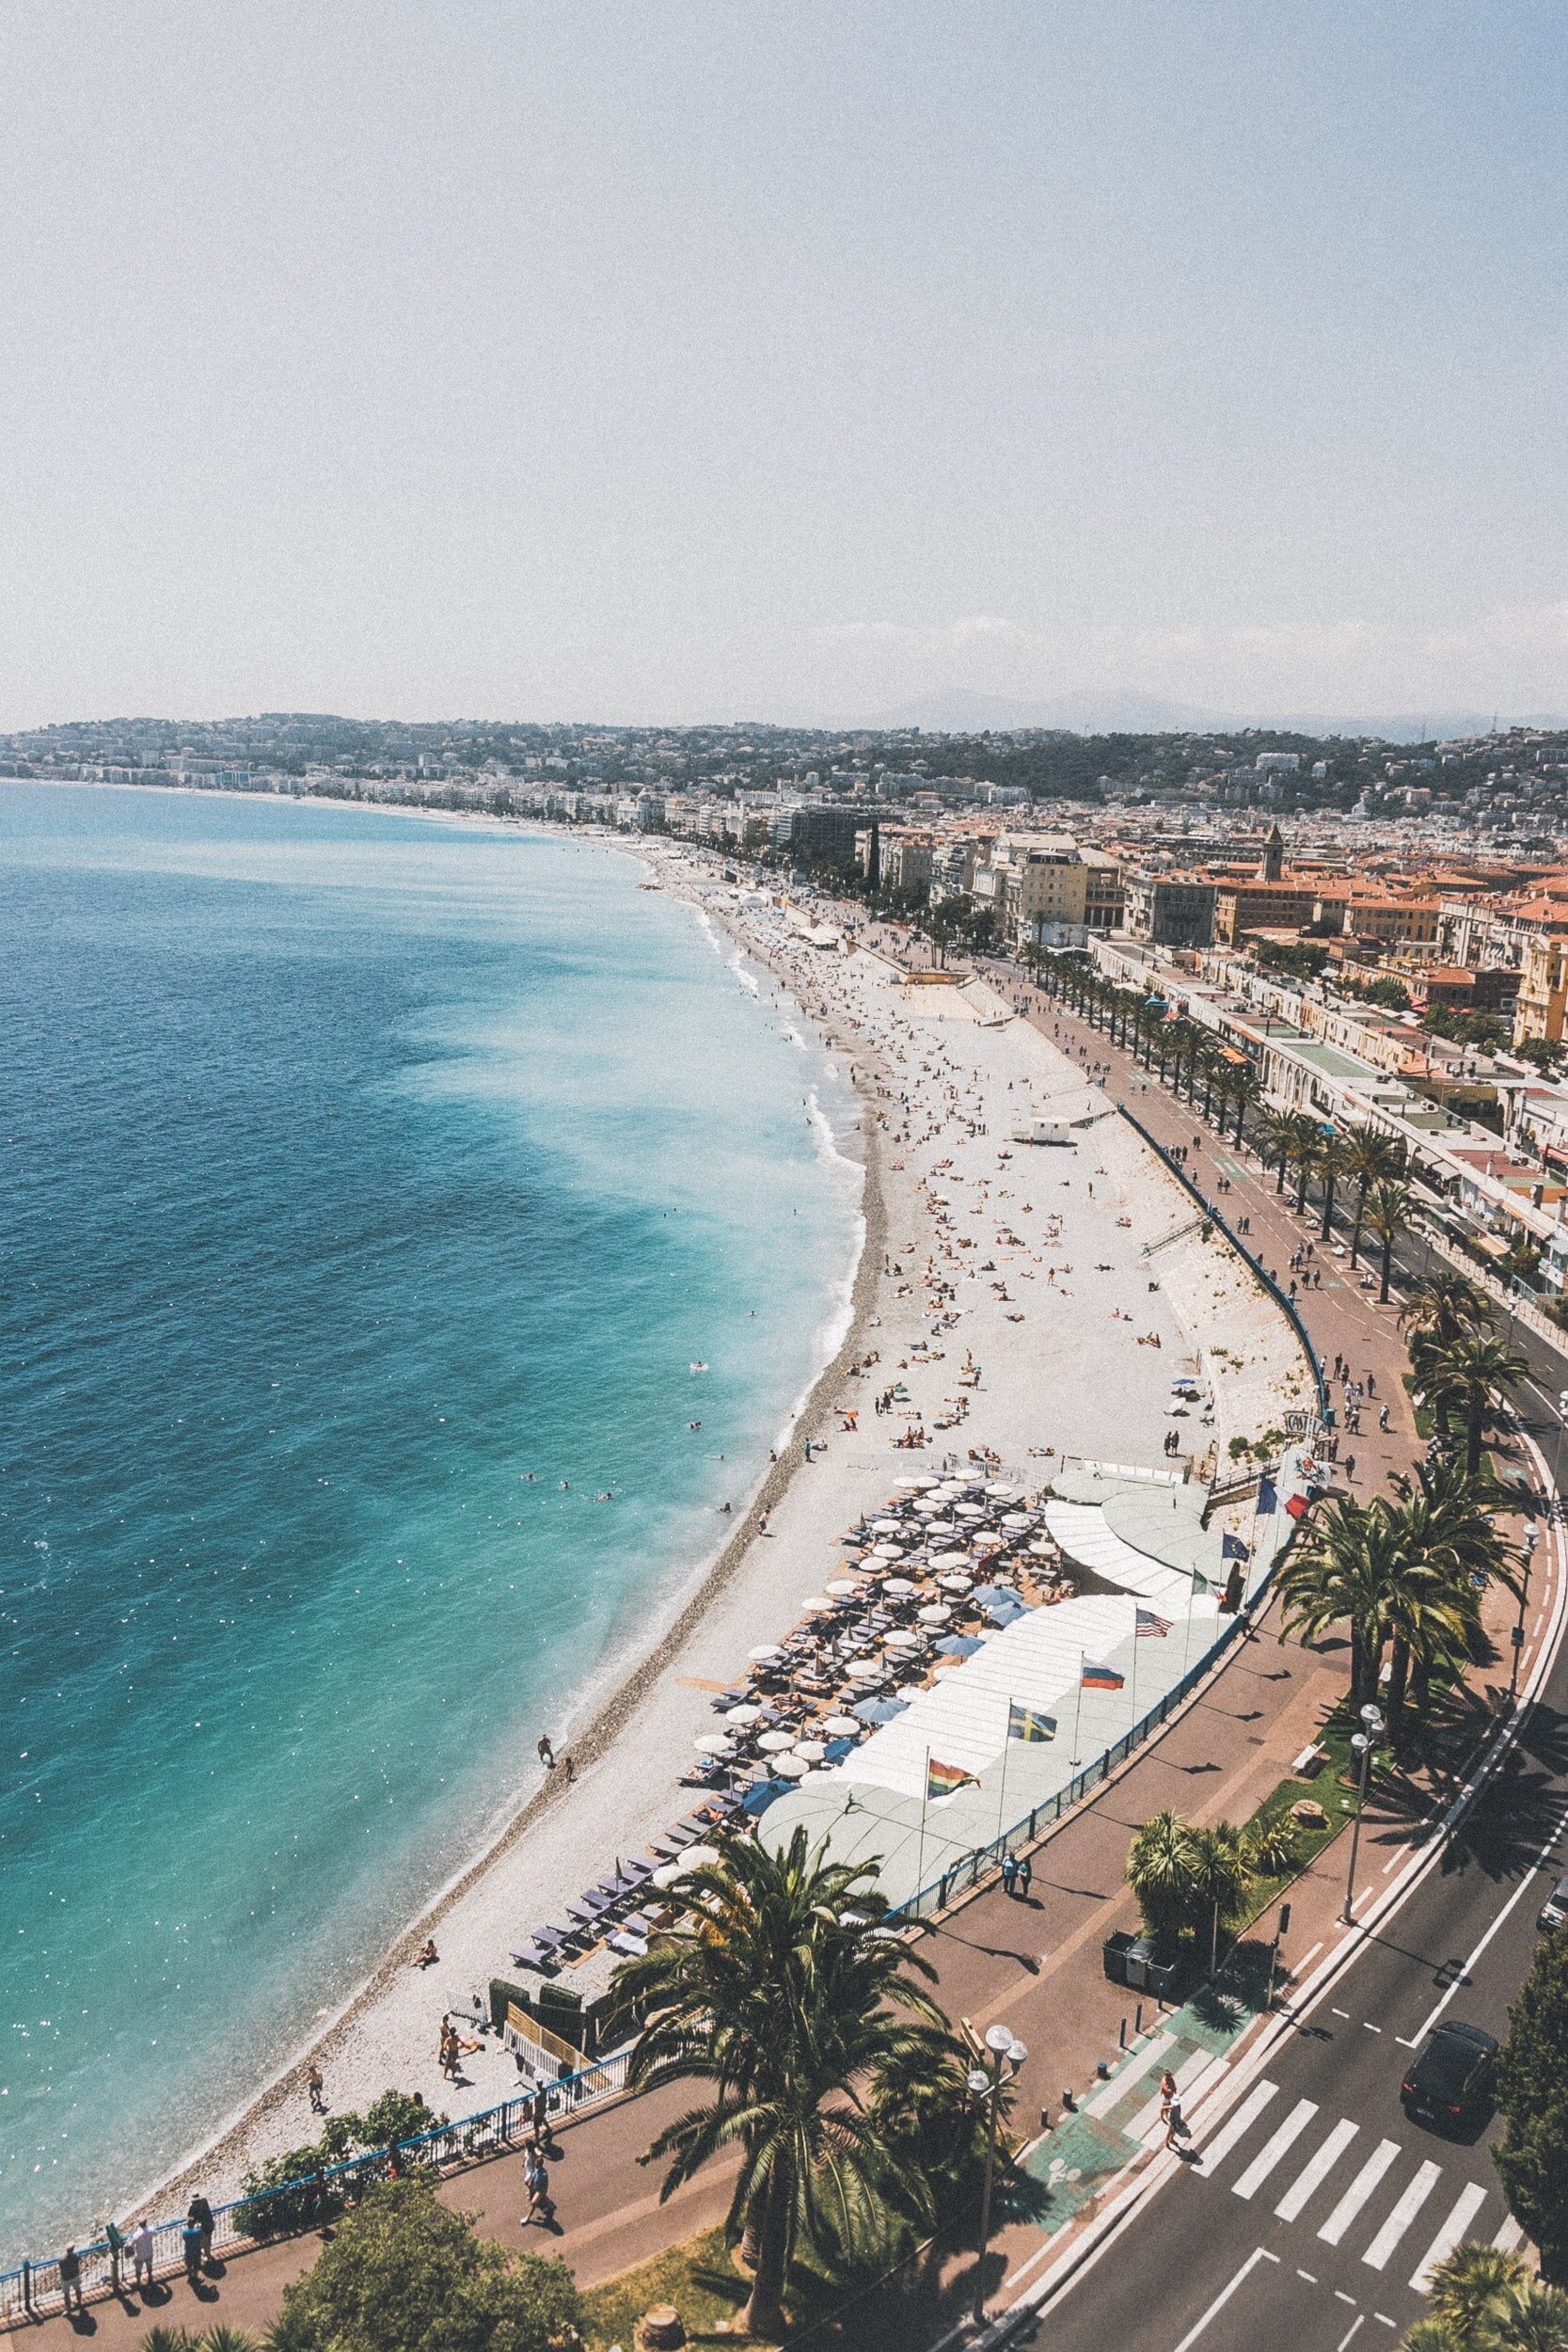 Discover the city of Nice on the Côte d'Azur